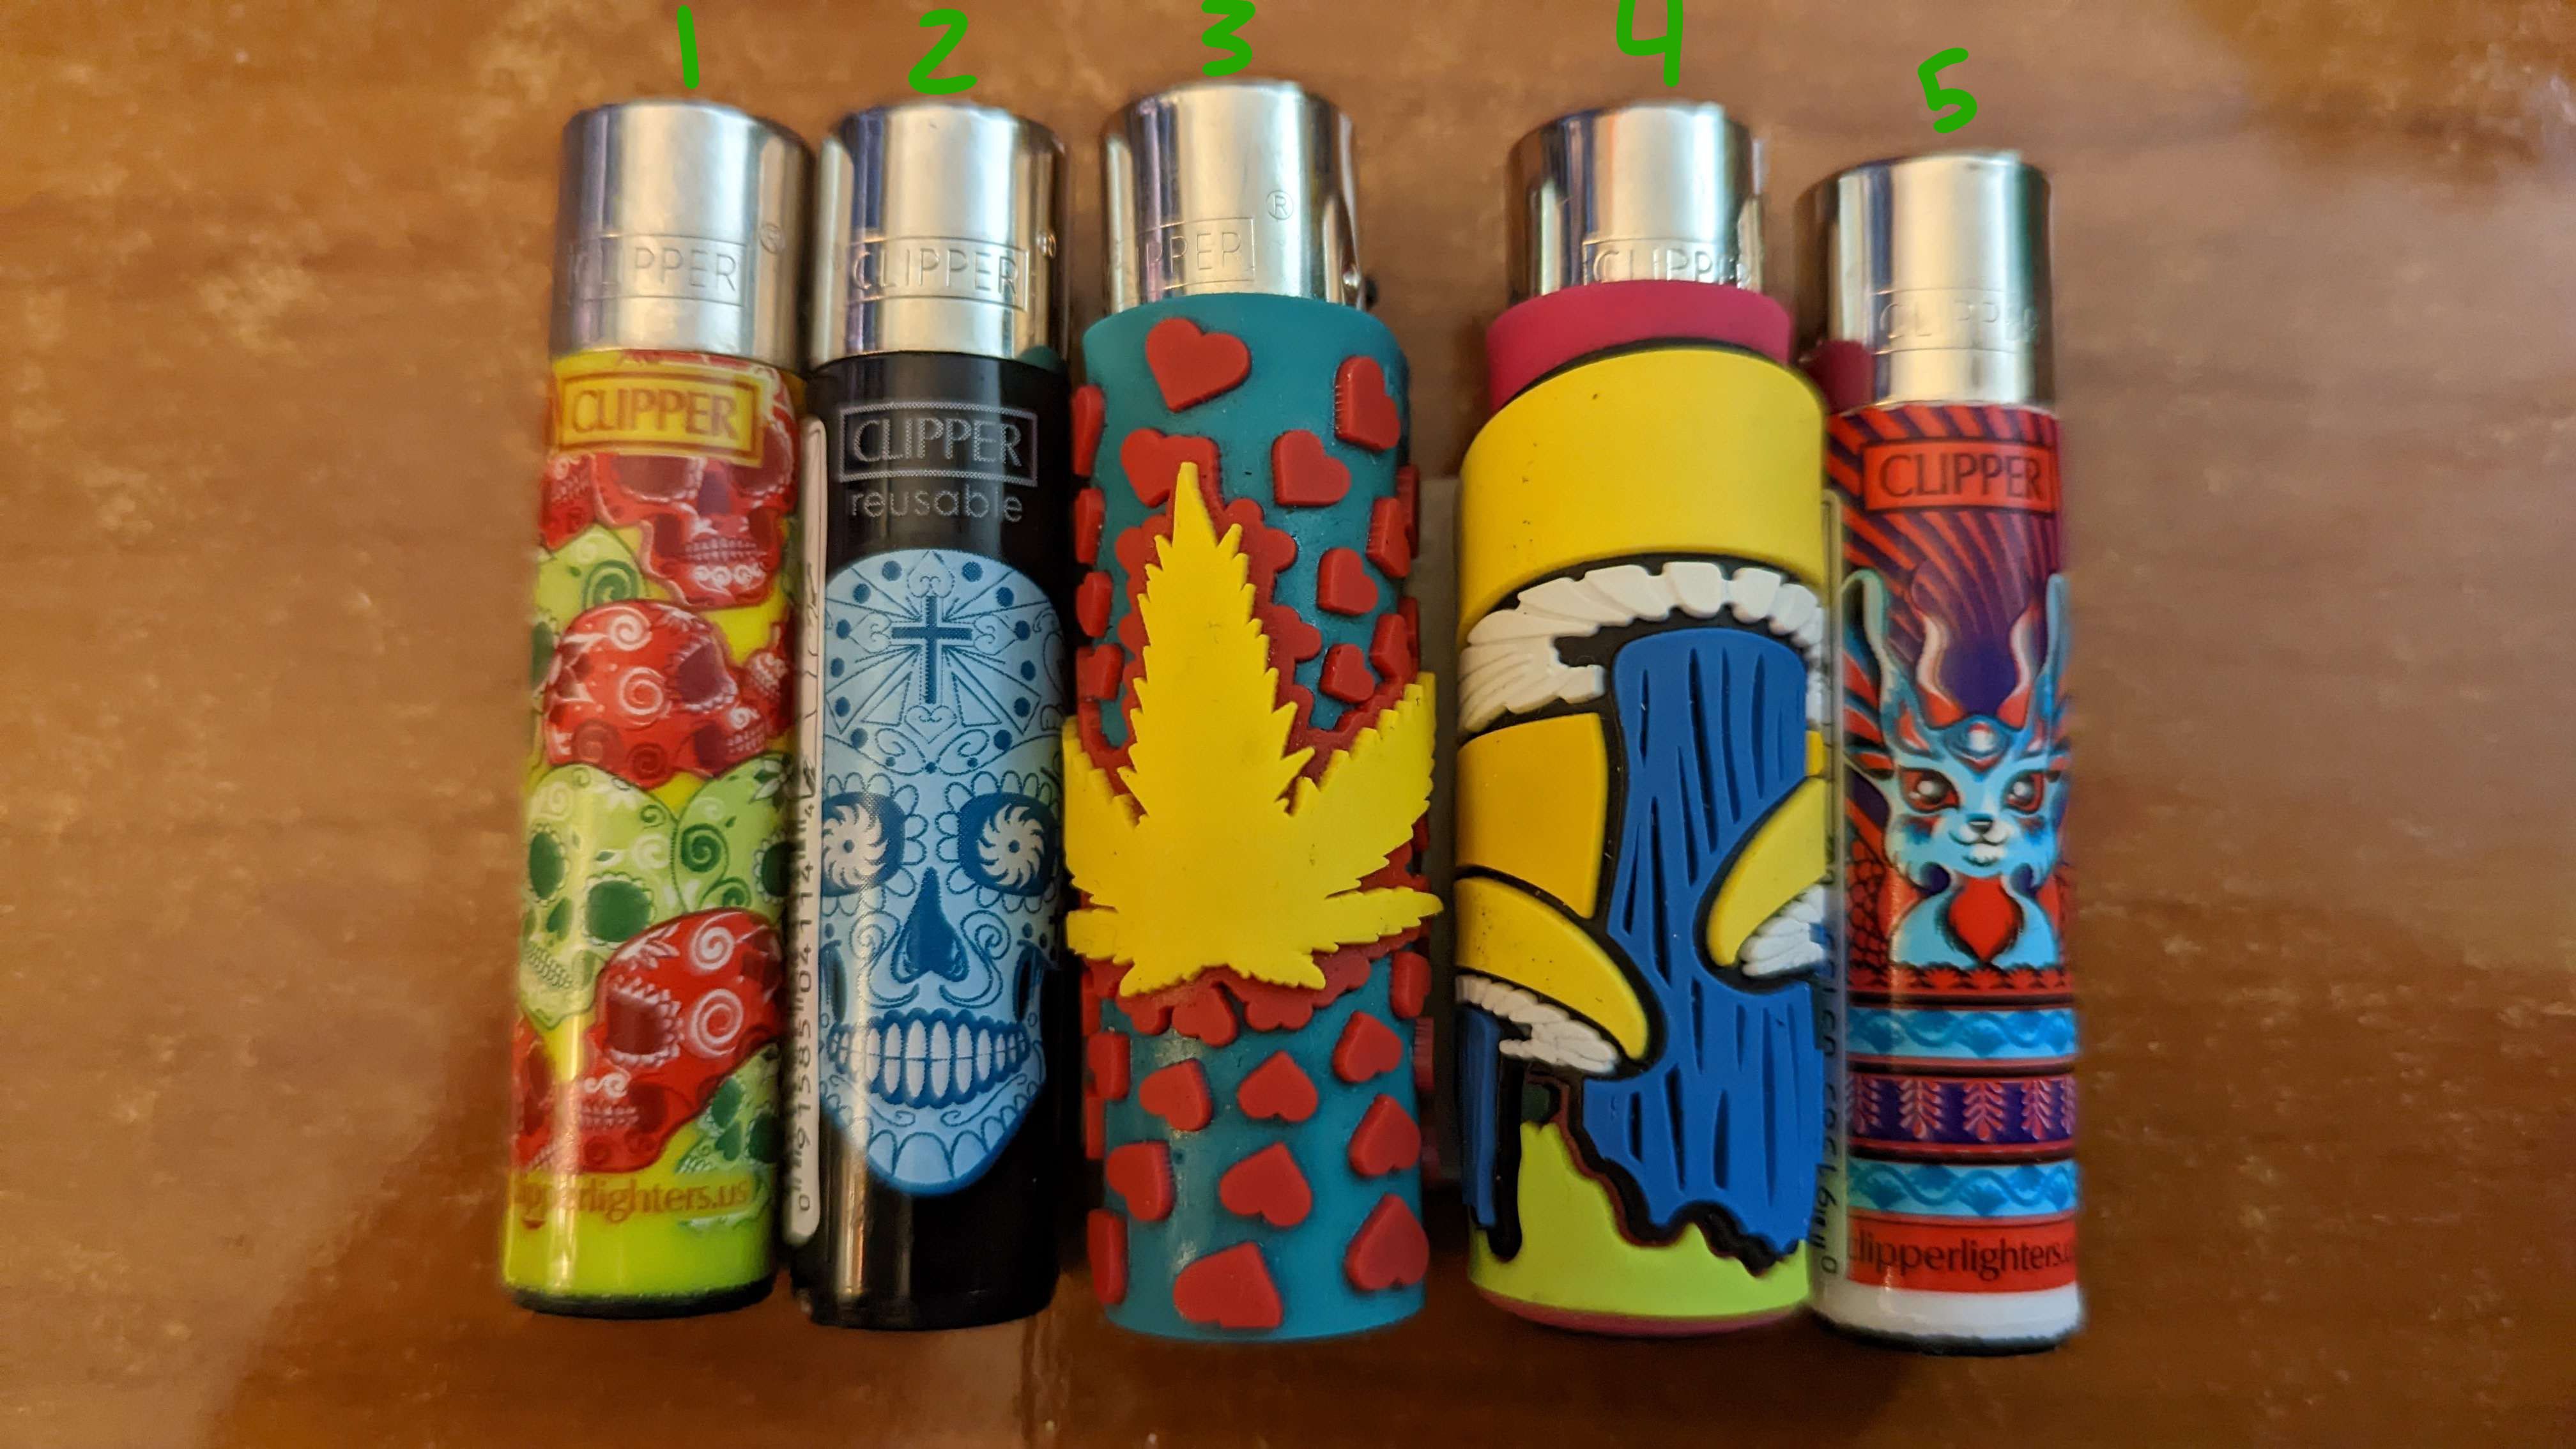 My clipper lighters